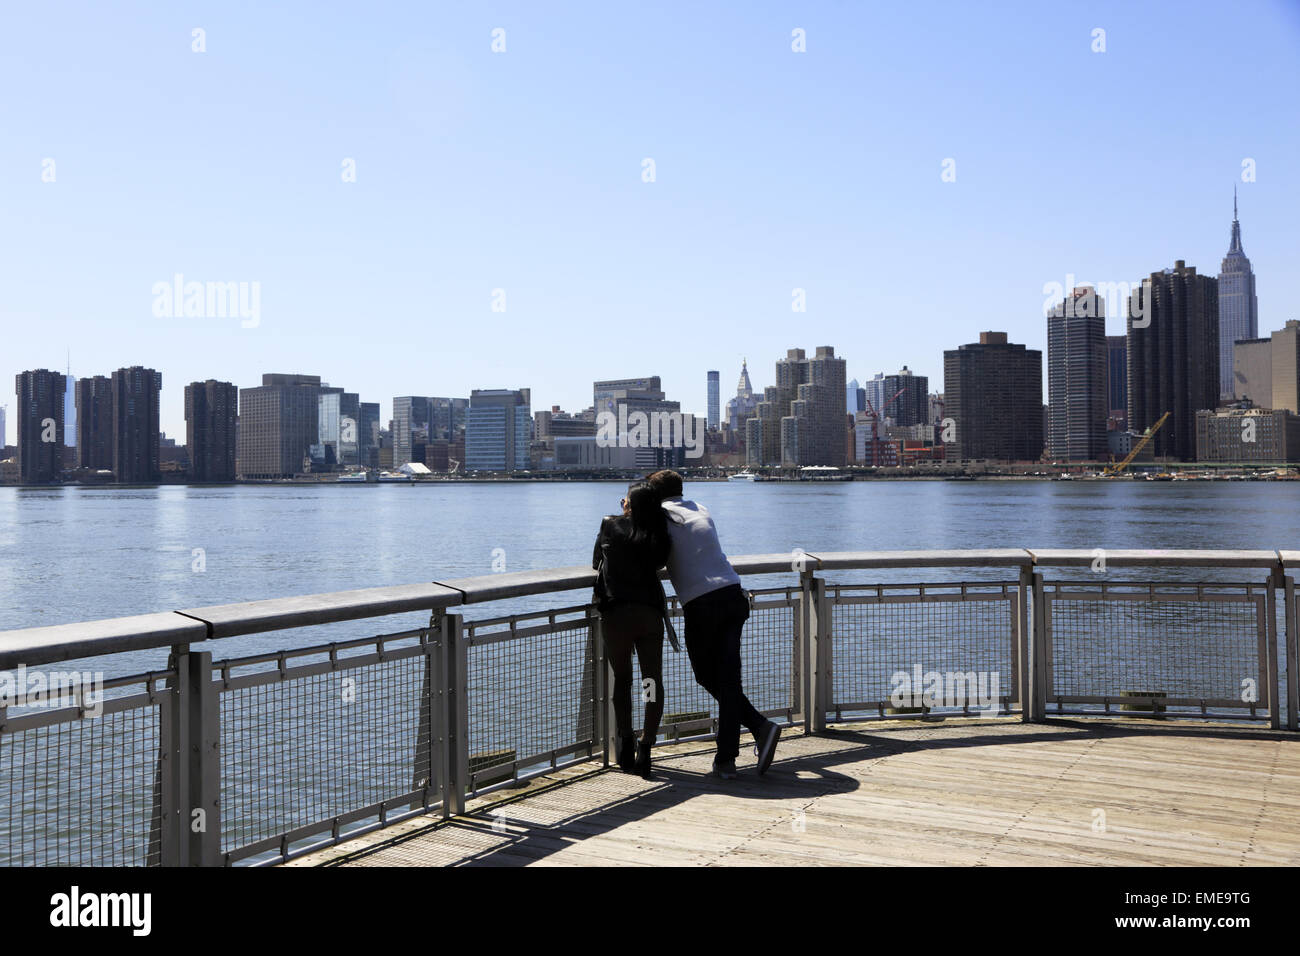 View of Midtown Manhattan with East River in foreground from Long Island City, Queens, New York USA Stock Photo